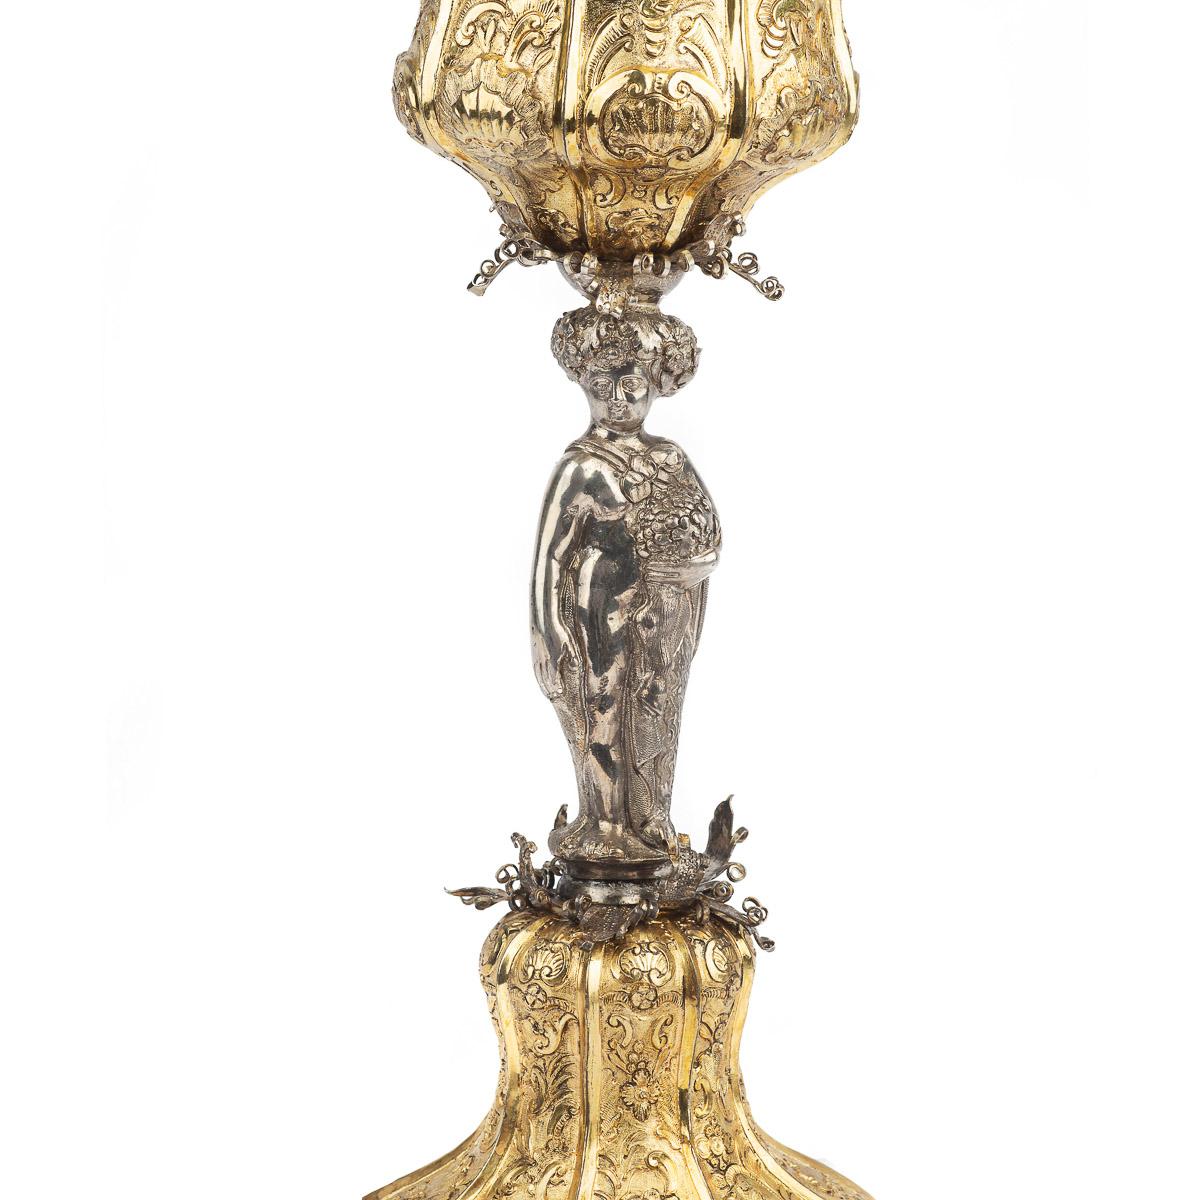 18th Century and Earlier 18th Century Russian Solid Silver-Gilt Huge Cup & Cover, Moscow, c.1749